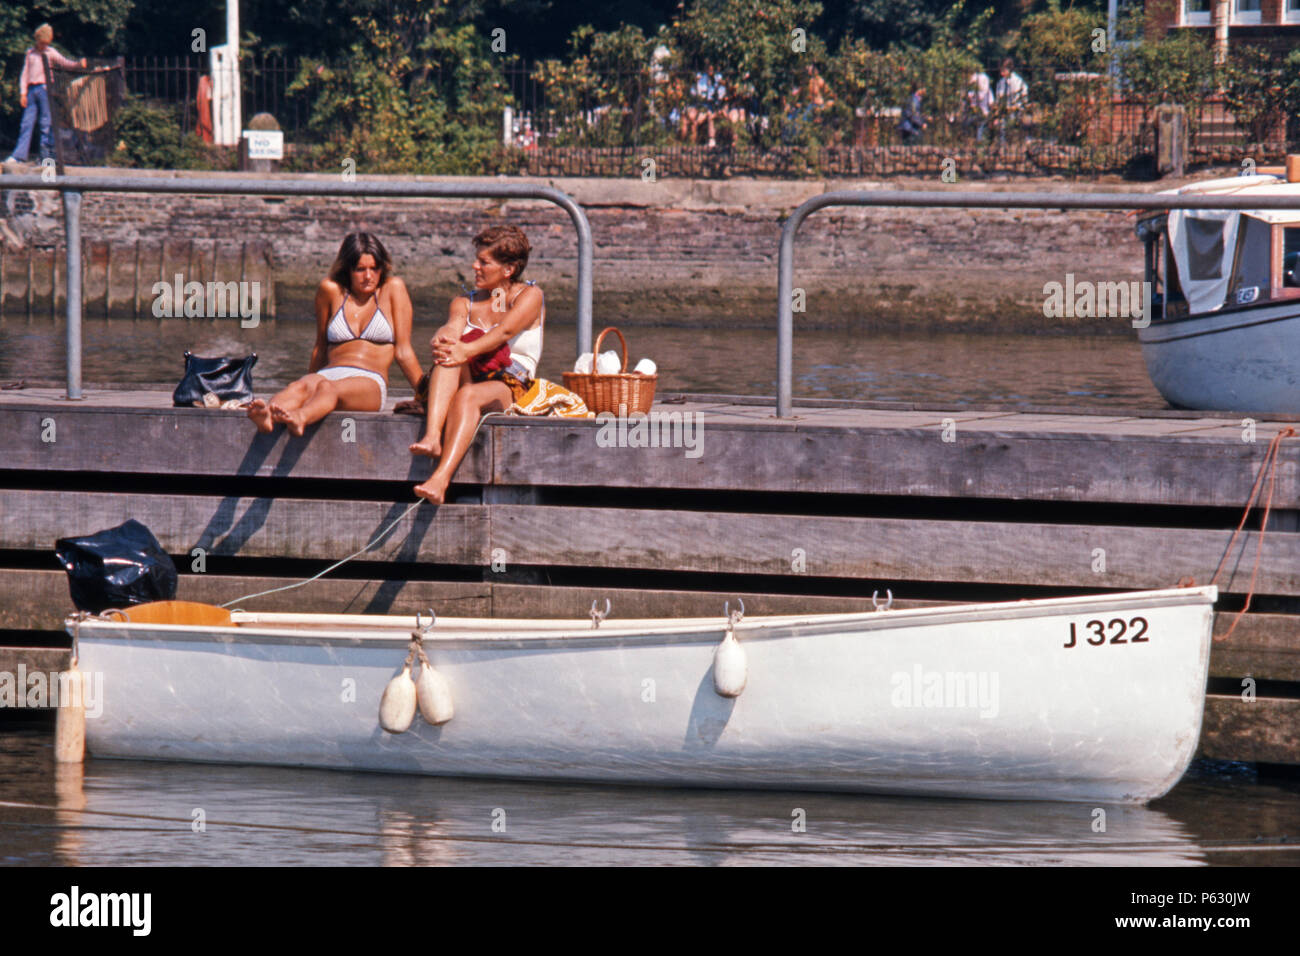 Two women sitting on a jetty chatting, Oulton Broad, Suffolk, England, 1975 Stock Photo